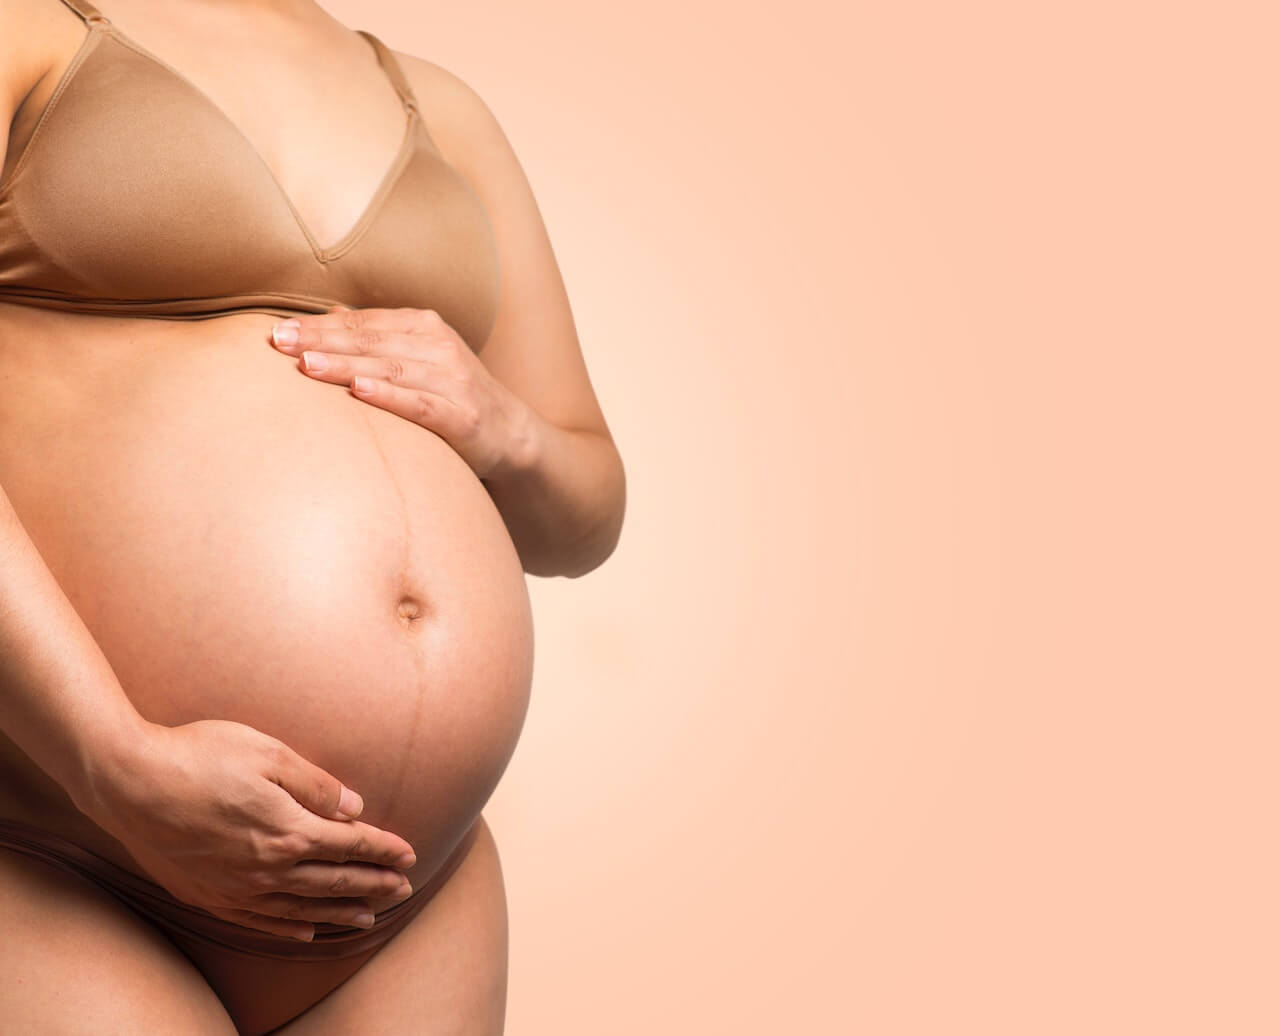 How Does Pregnancy Affect Psoriasis? - Everything You Need to Know